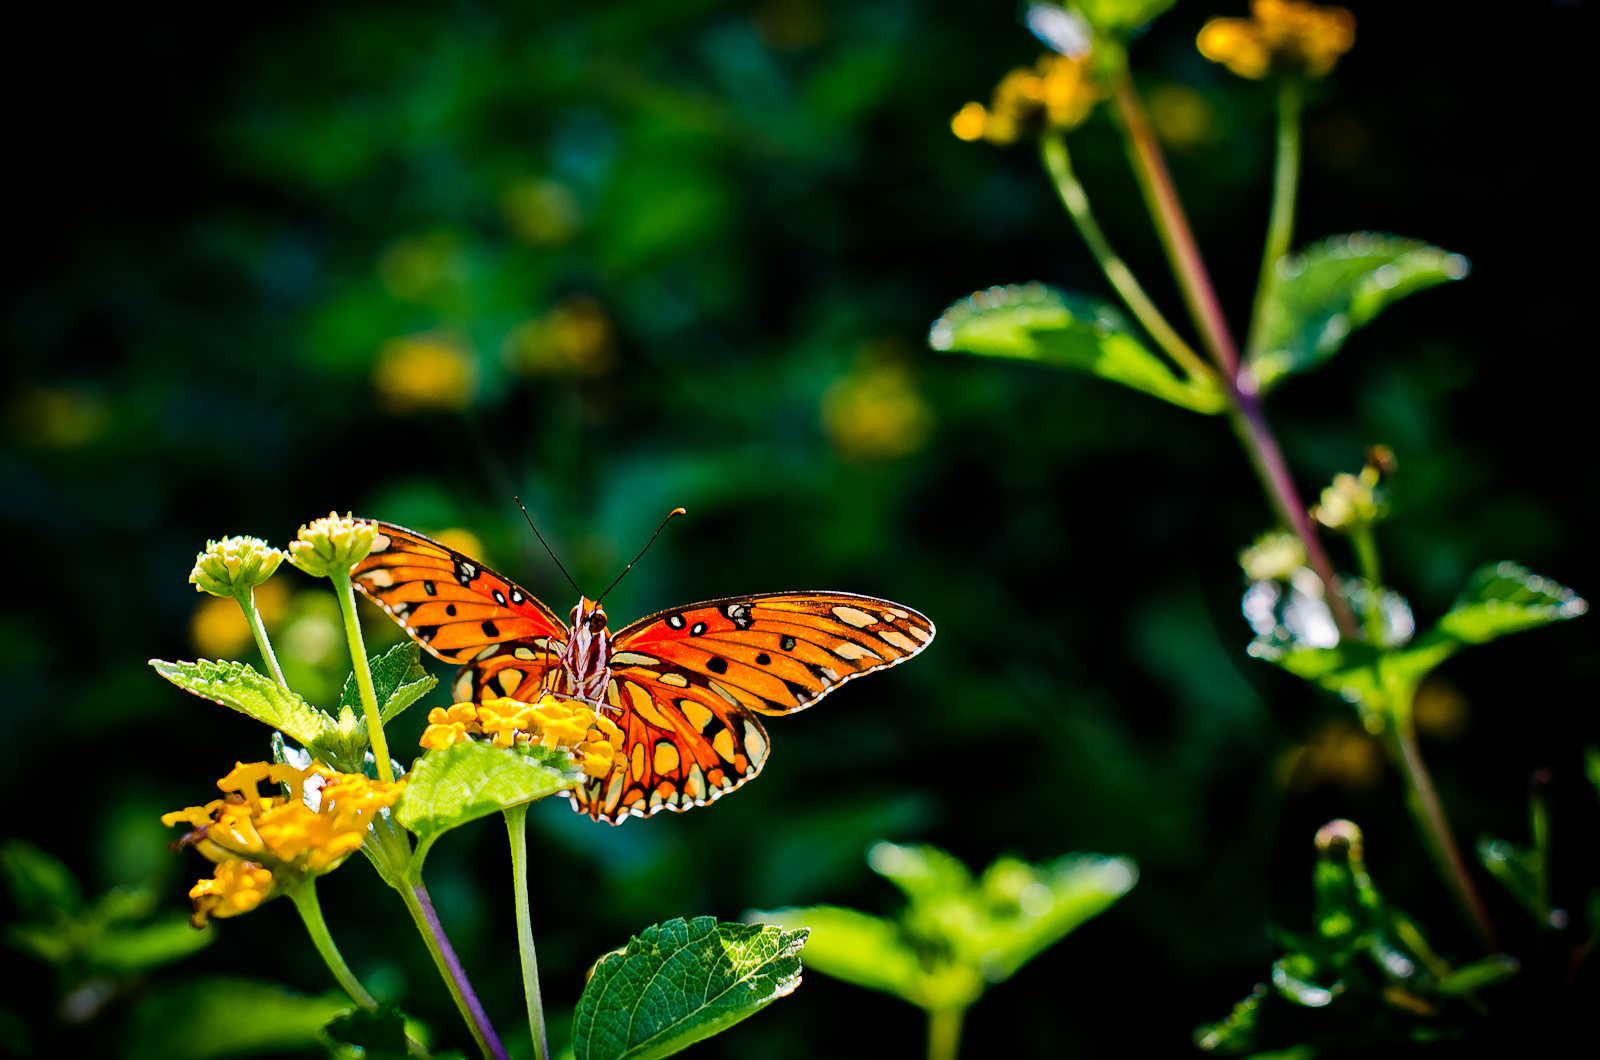 Project 365 [Day 271] Butterly on the Lantana in the Back Yard. This image is part of my ongoing Project 365.